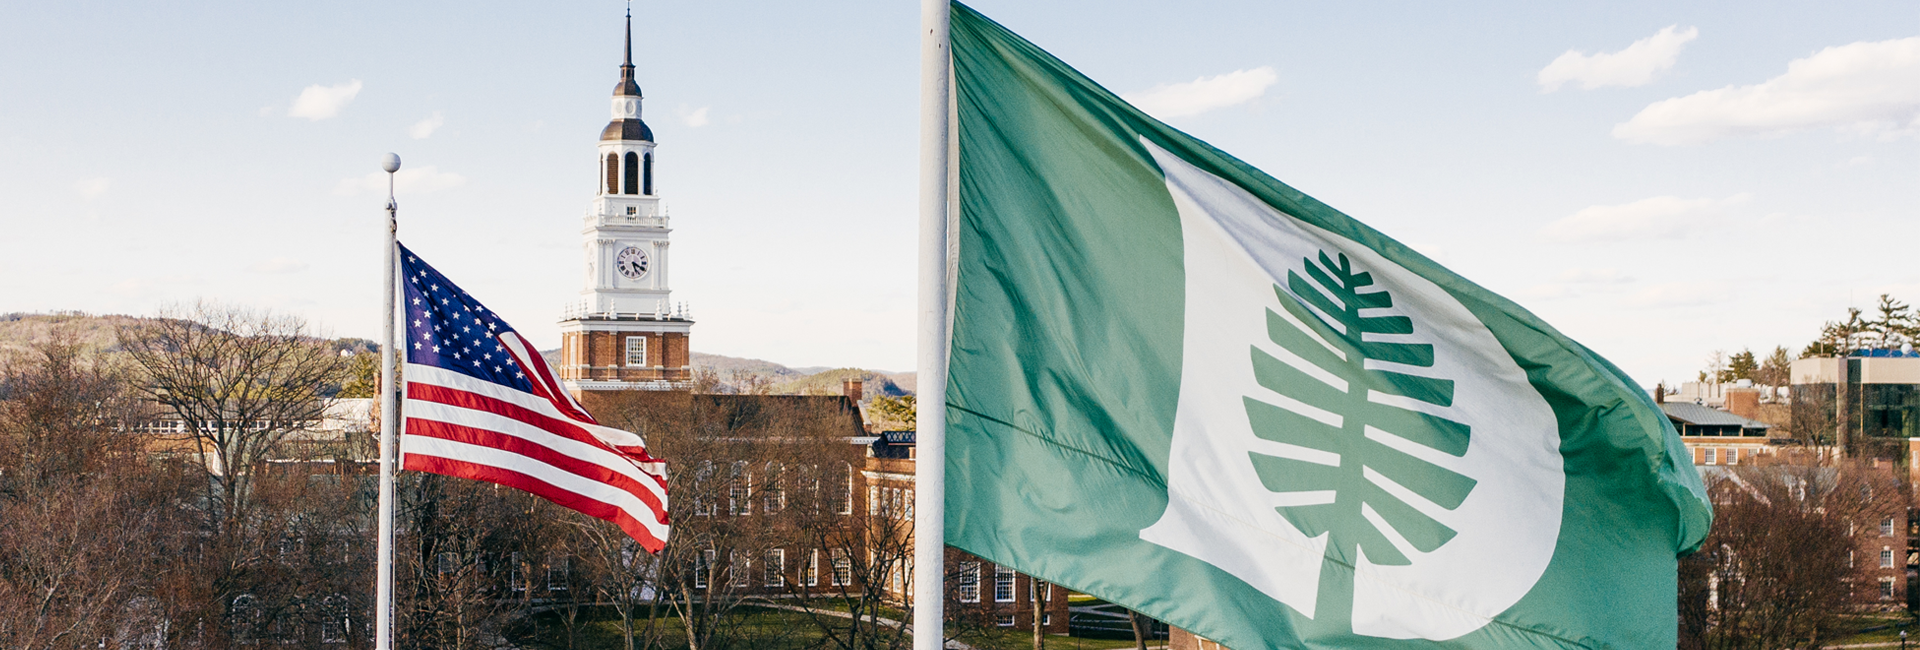 Dartmouth flag in the foreground, American flag in the middle ground, Baker Tower in the background